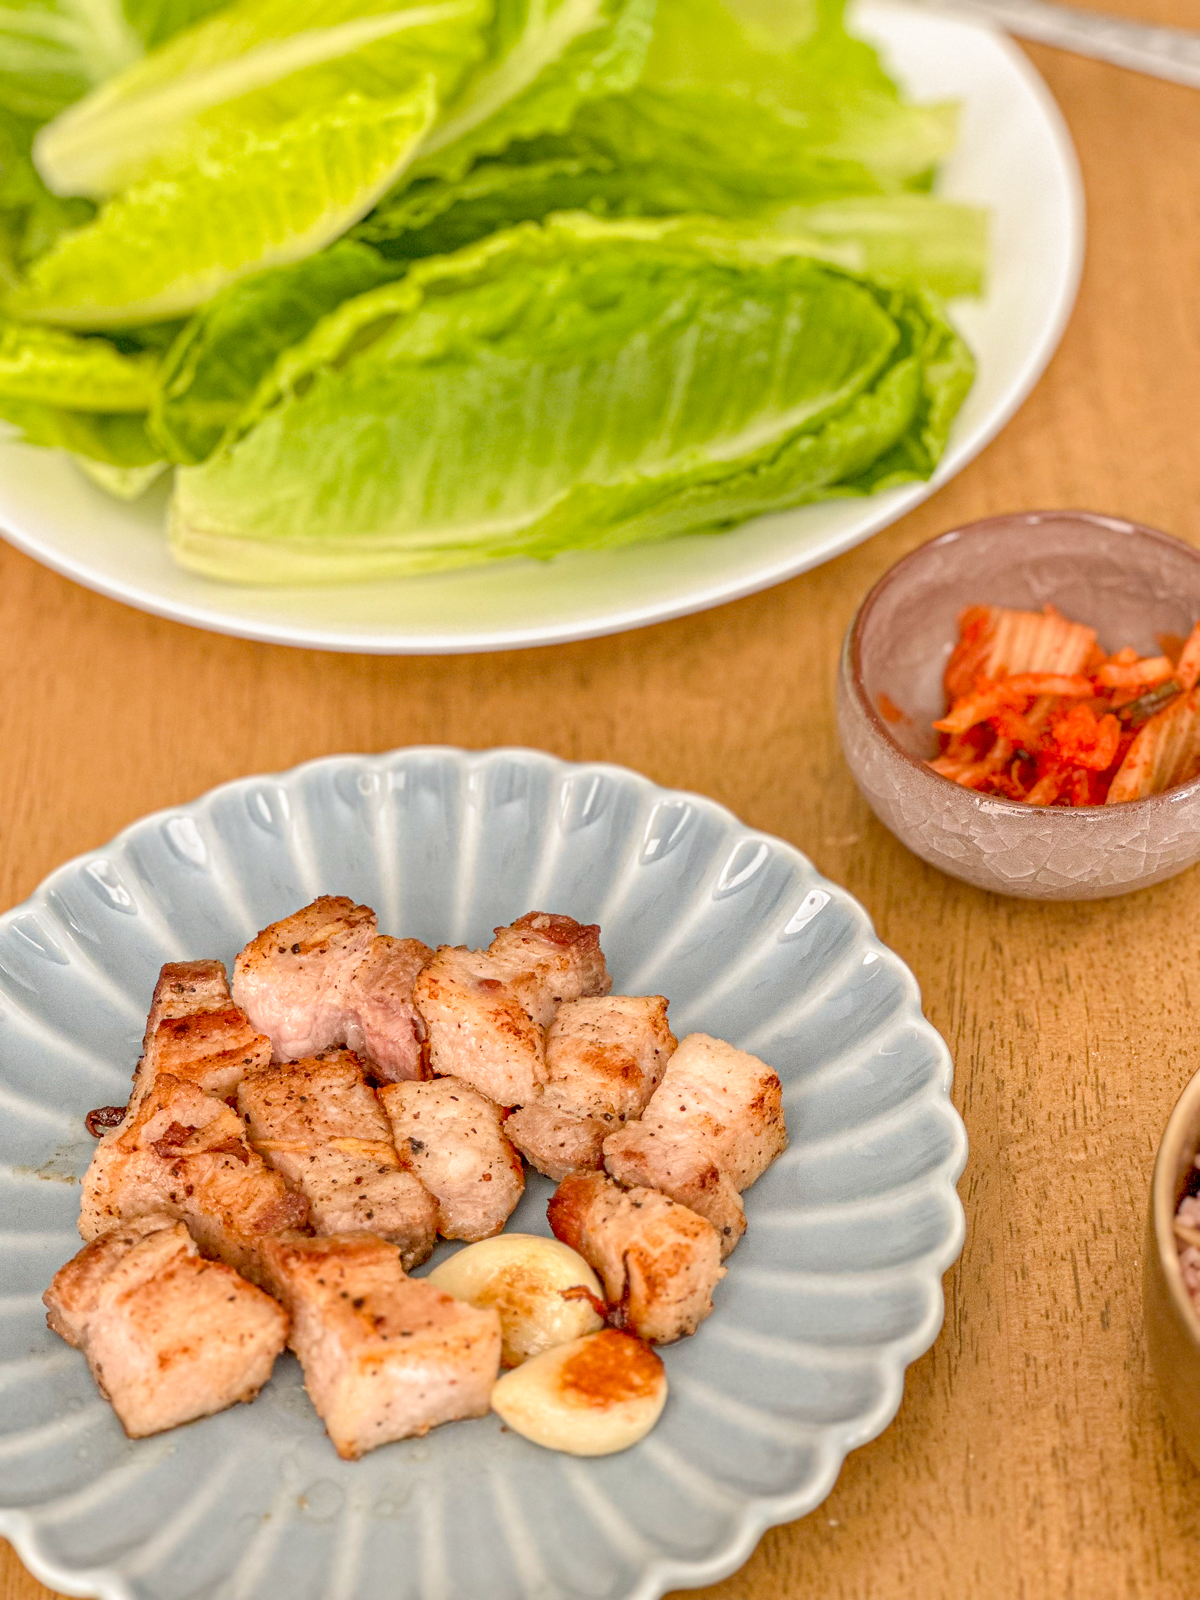 Grilled pork belly with lettuce and kimchi on the side.